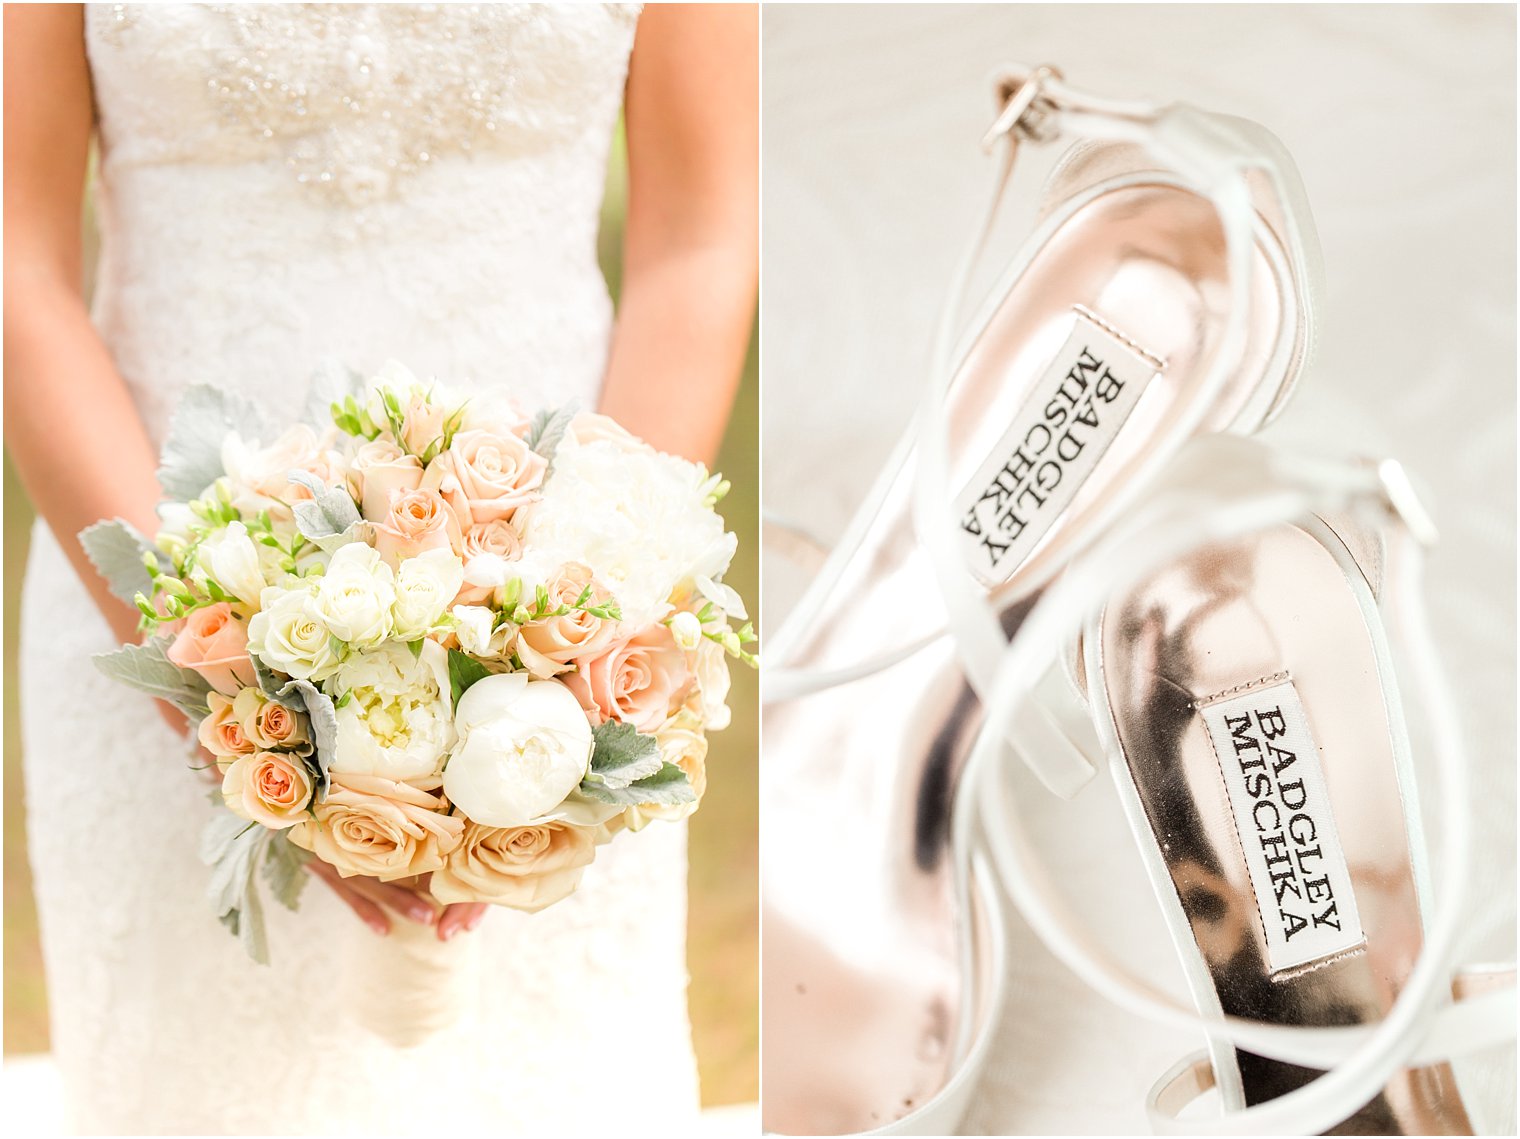 Flowers by Joan wedding bouquet and Badgley Mischka shoes